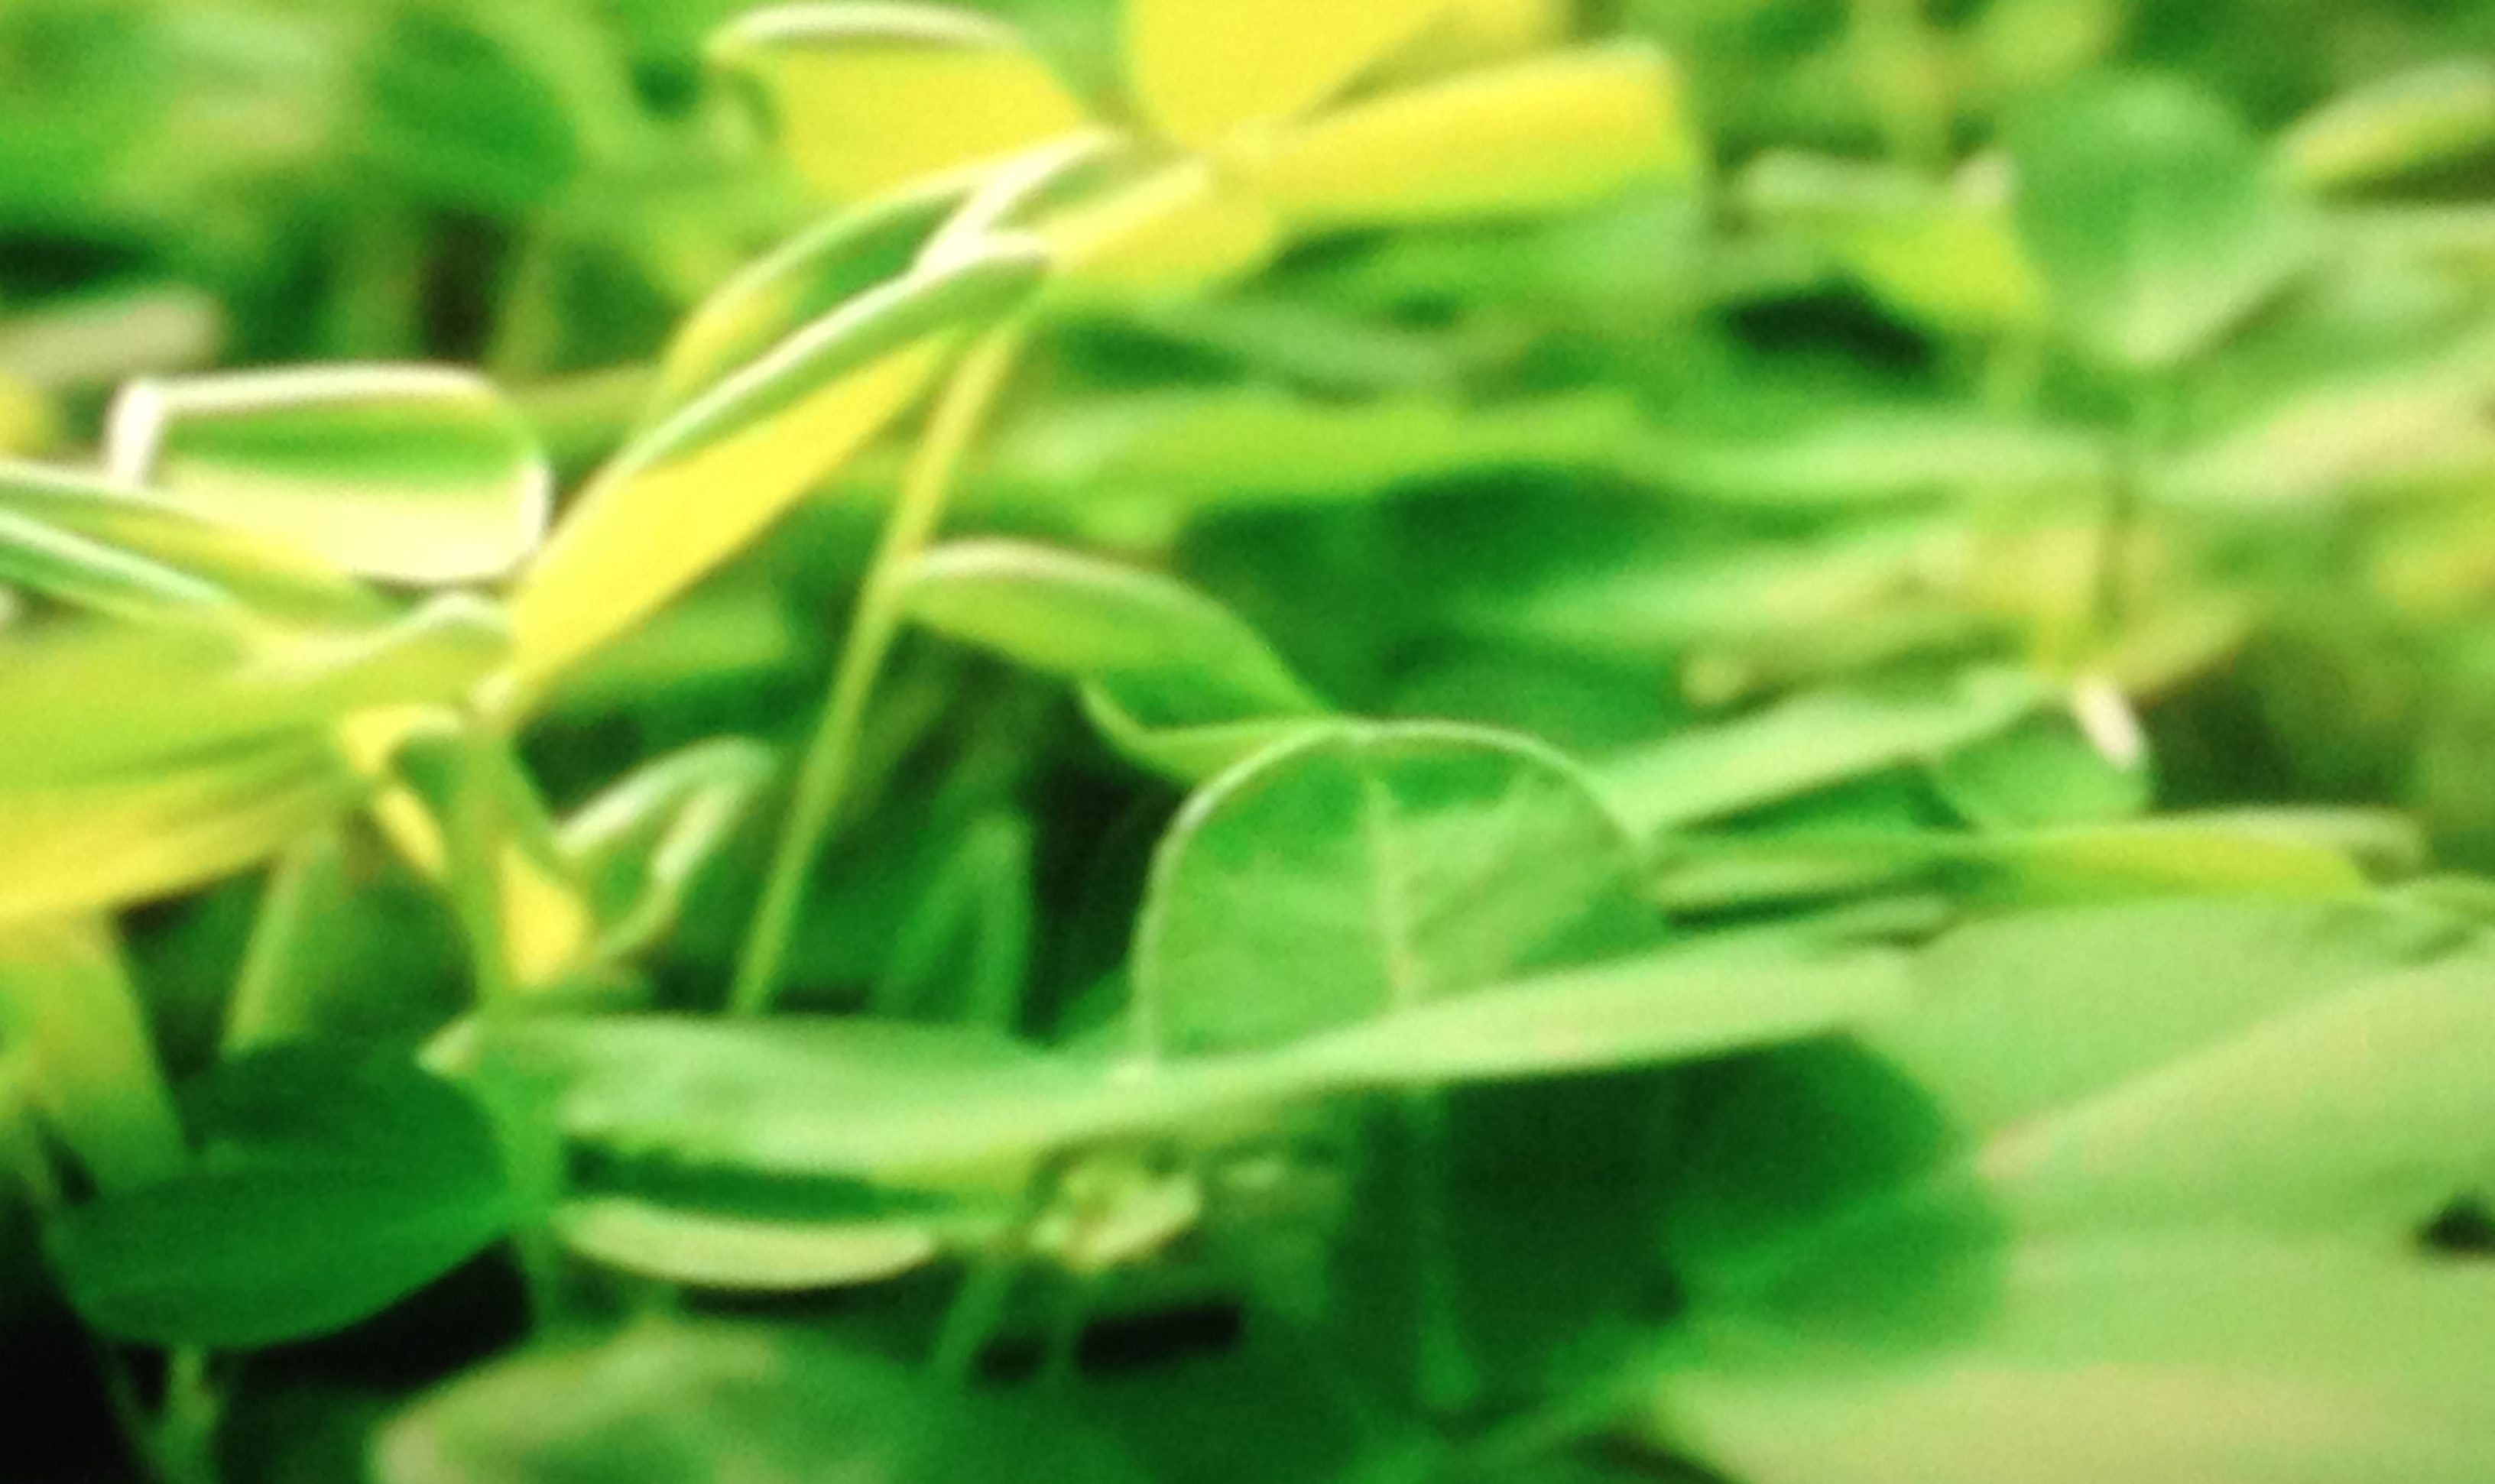 "Satisfying too" - close-up of green plants in garden